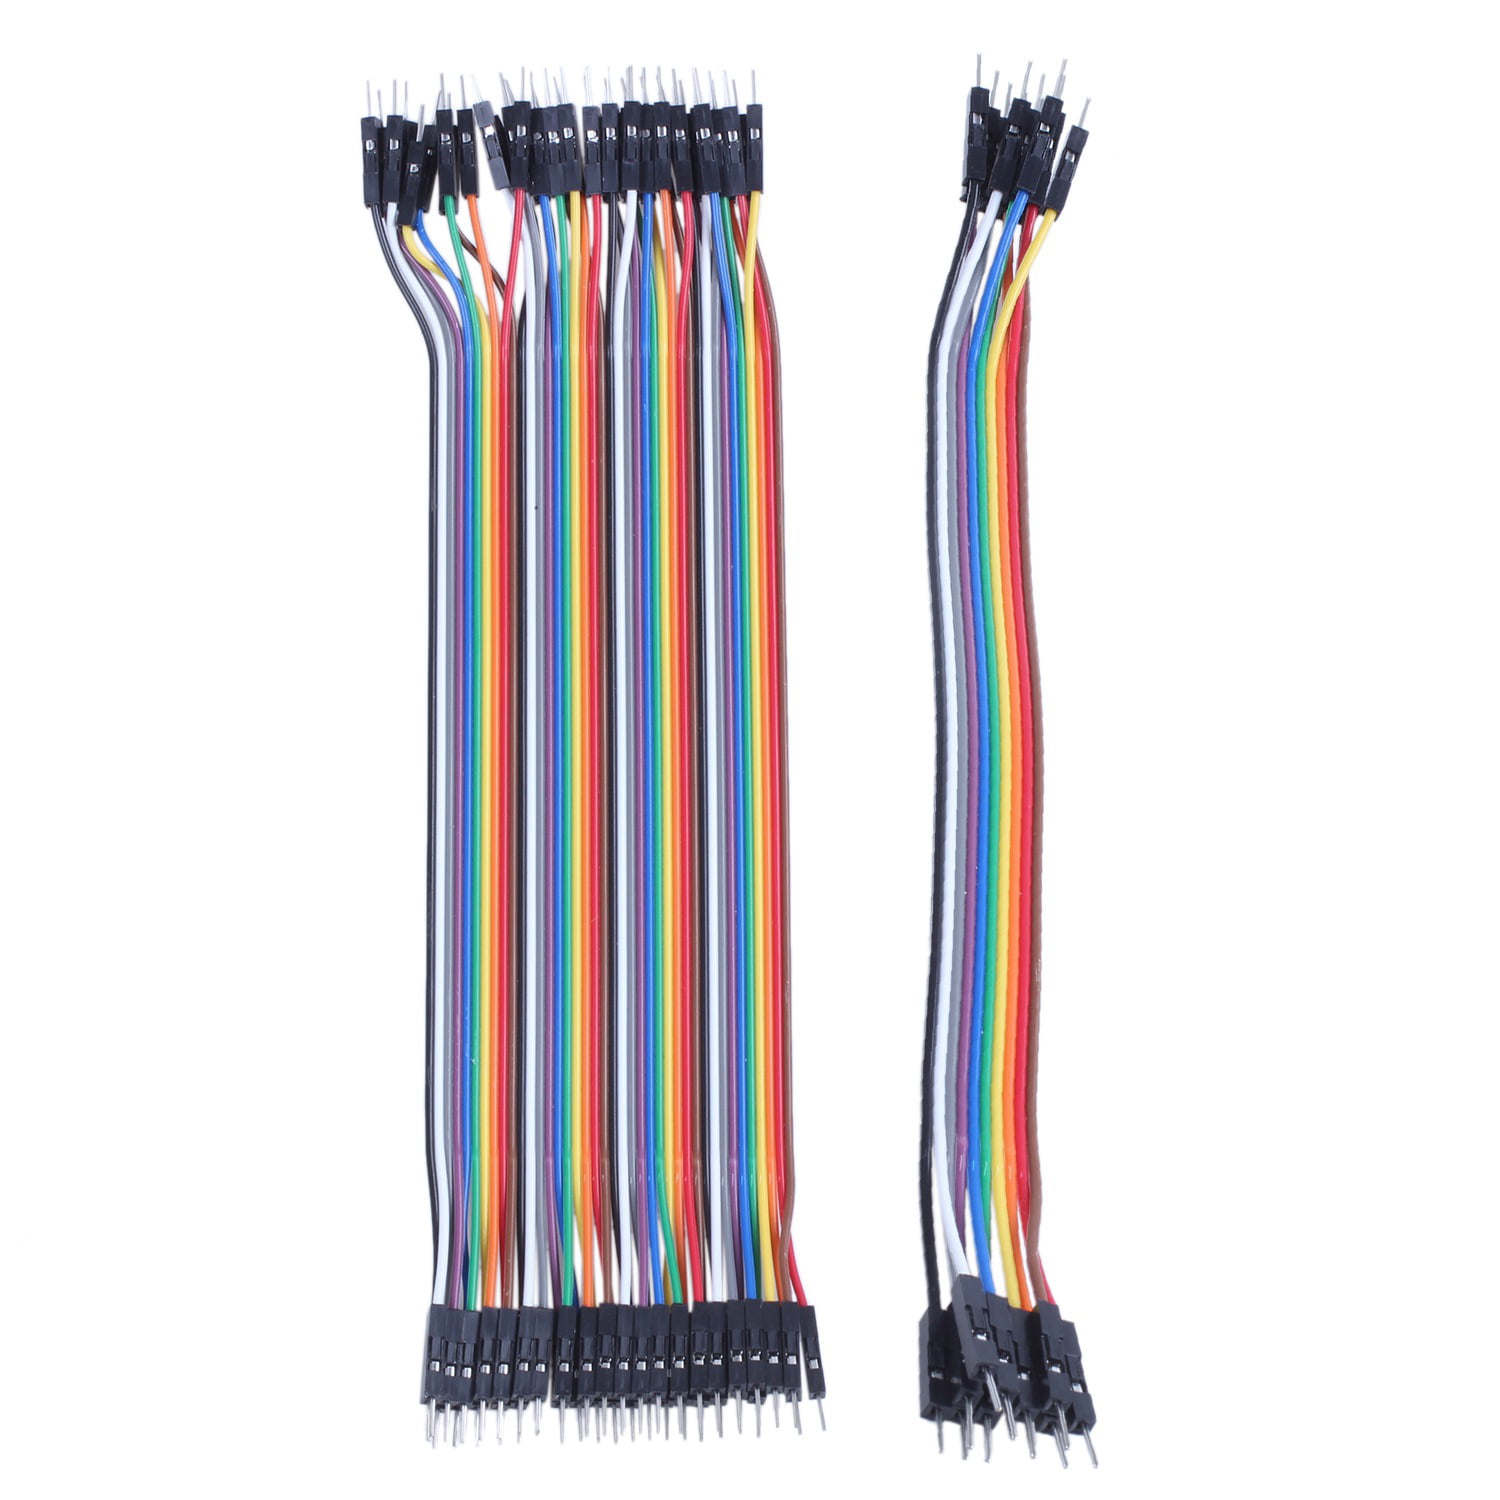 11cm 2.54mm 8-Pin Female to Female Connecting Jumper Wire Cable 5 Pcs 